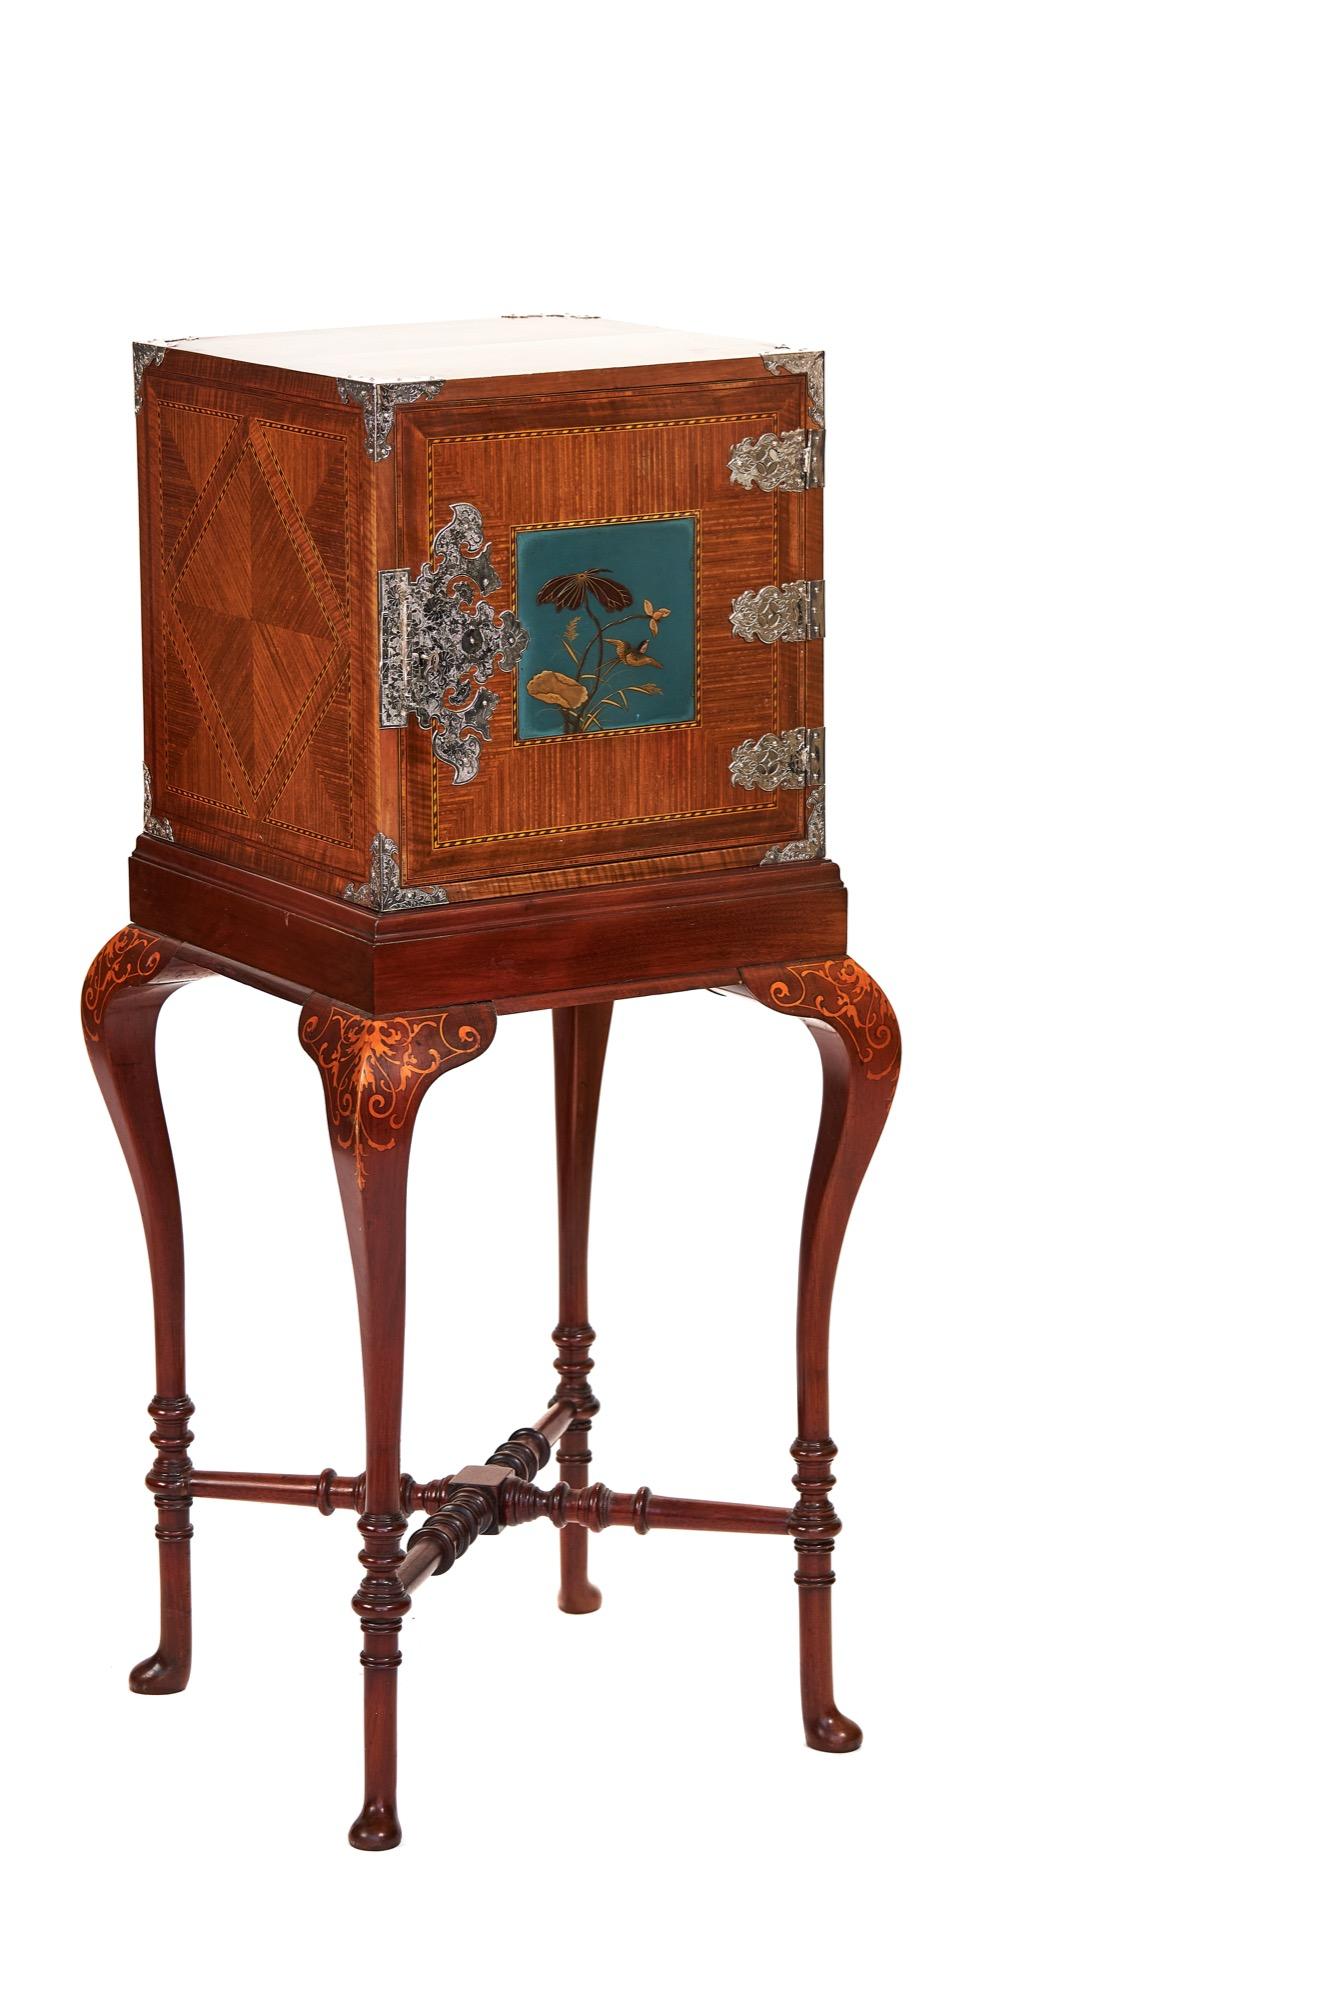 Dutch Colonial Fine Gillows, Walnut & Kingwood inlaid fitted drawer cabinet on stand For Sale